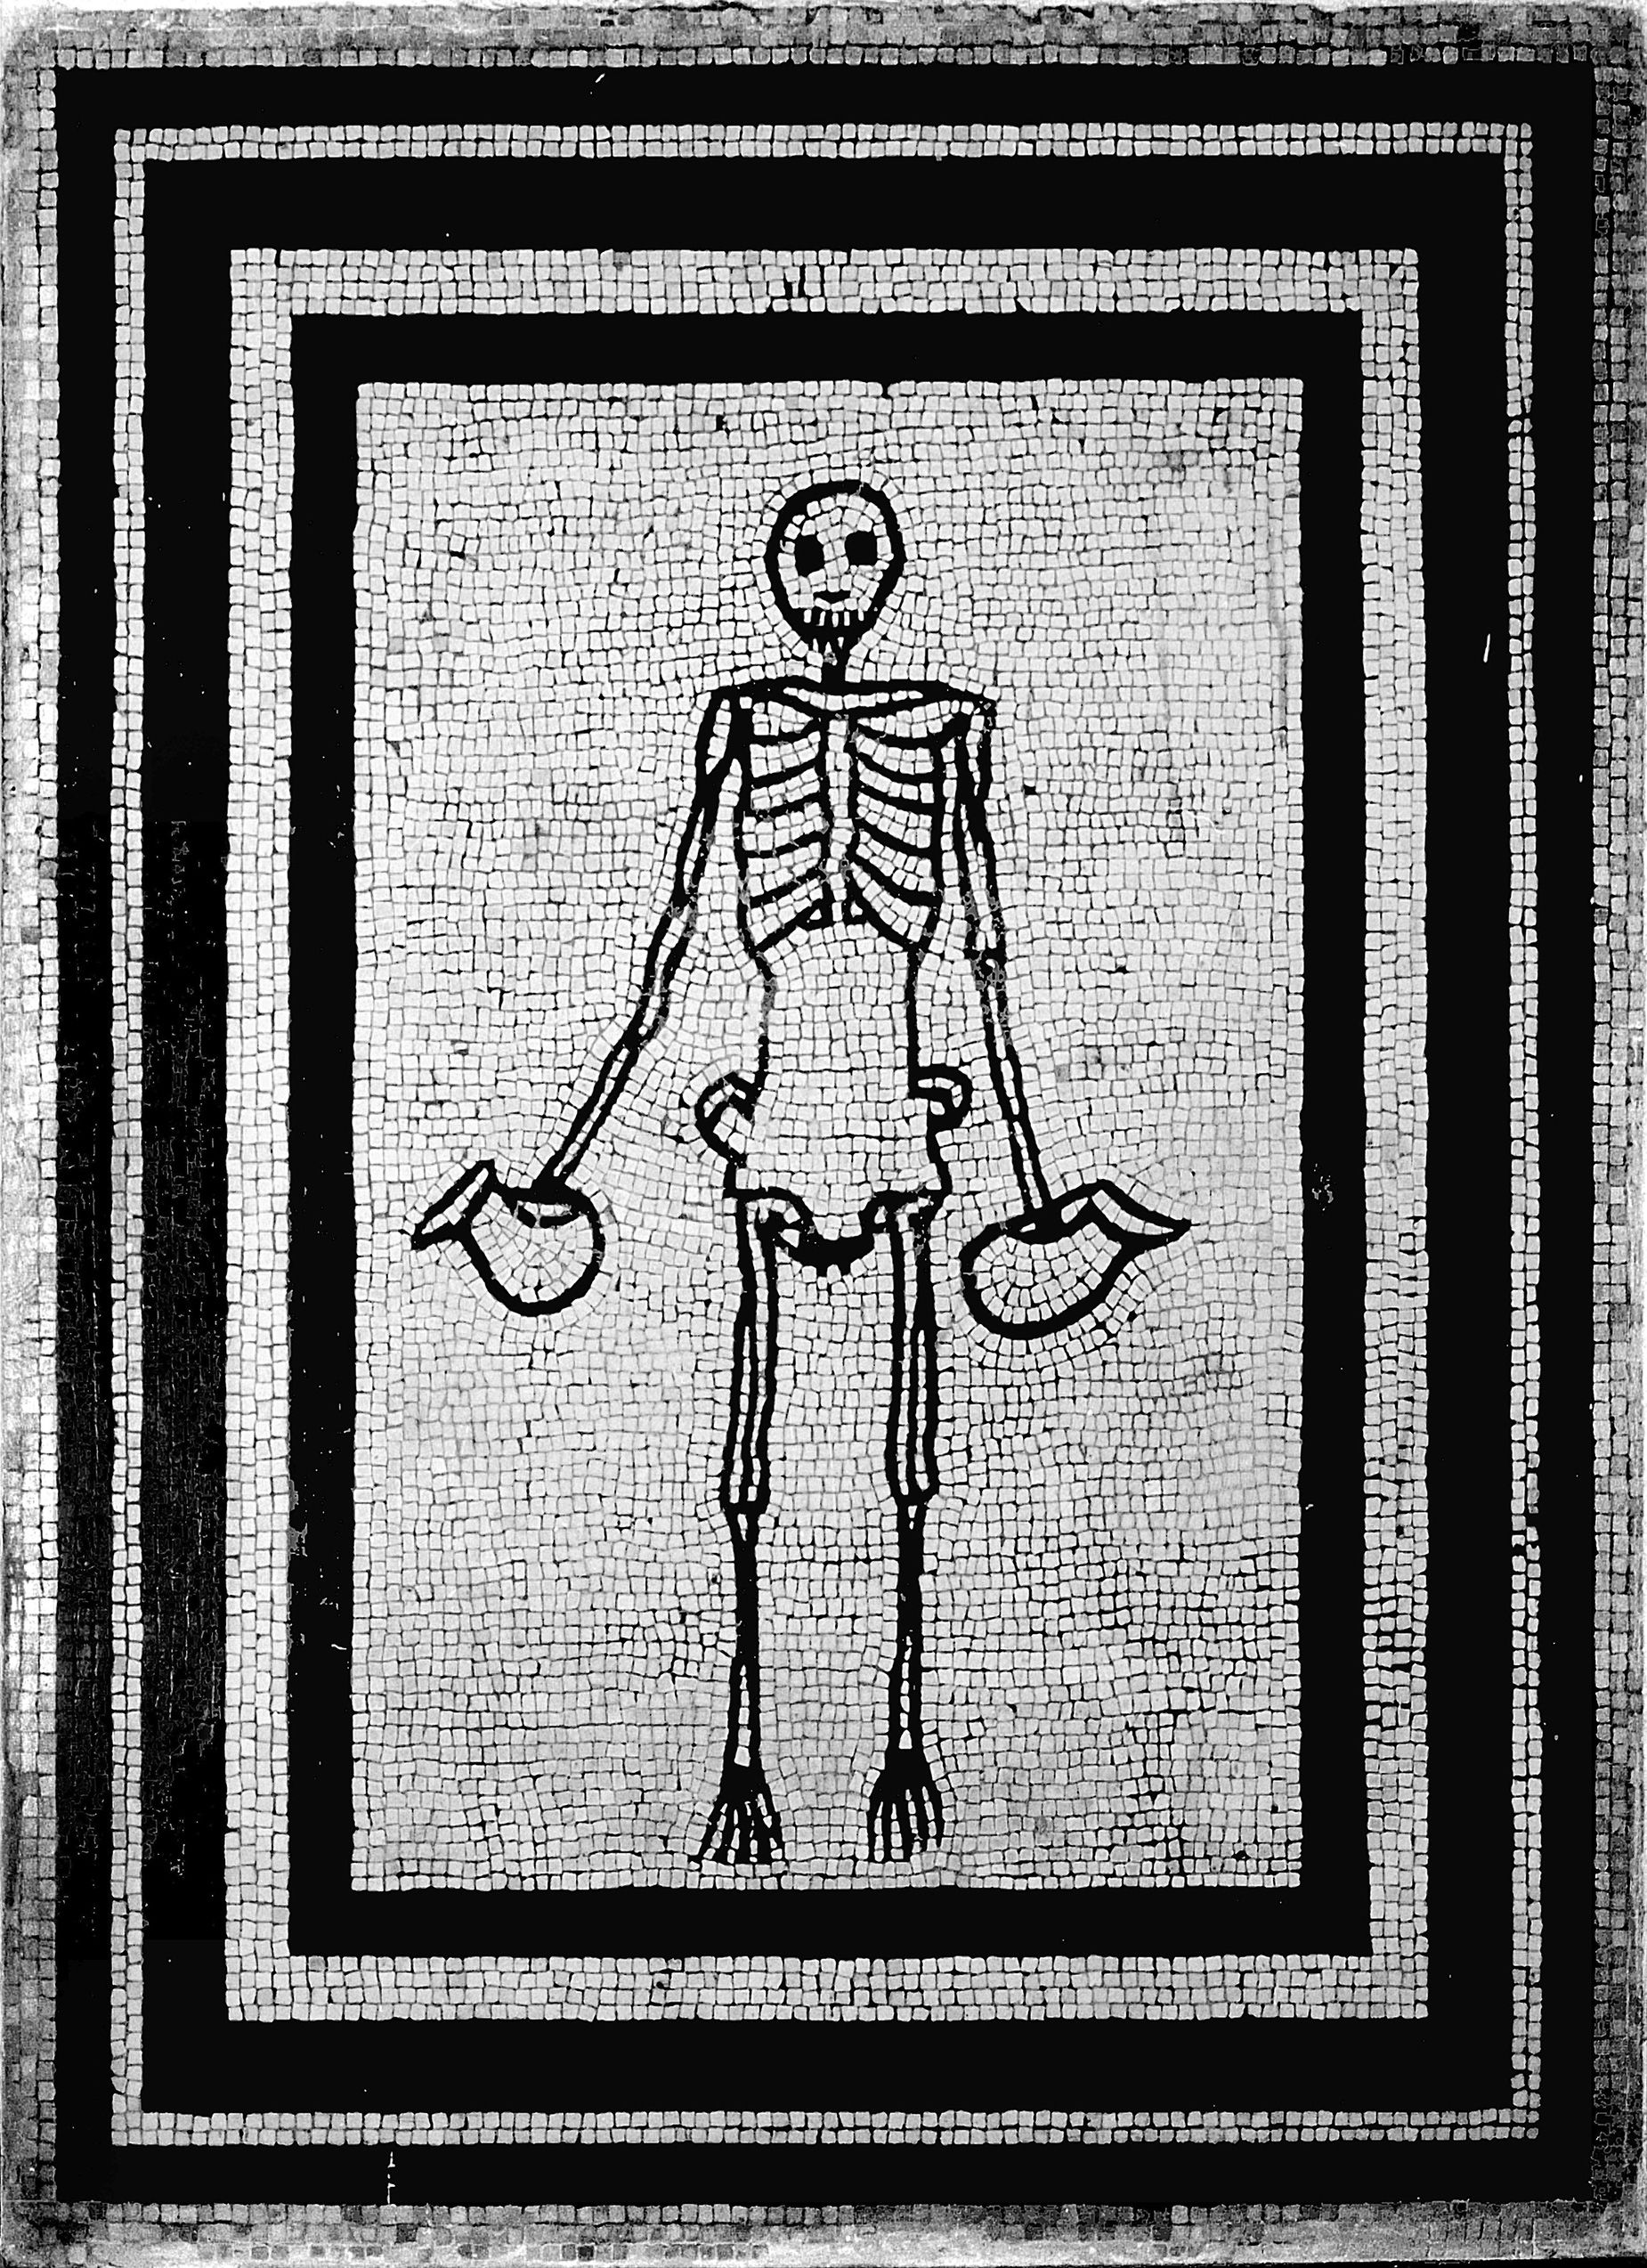 A mosaic of a skeleton from the House of Vestals in Pompeii holding jugs of wine